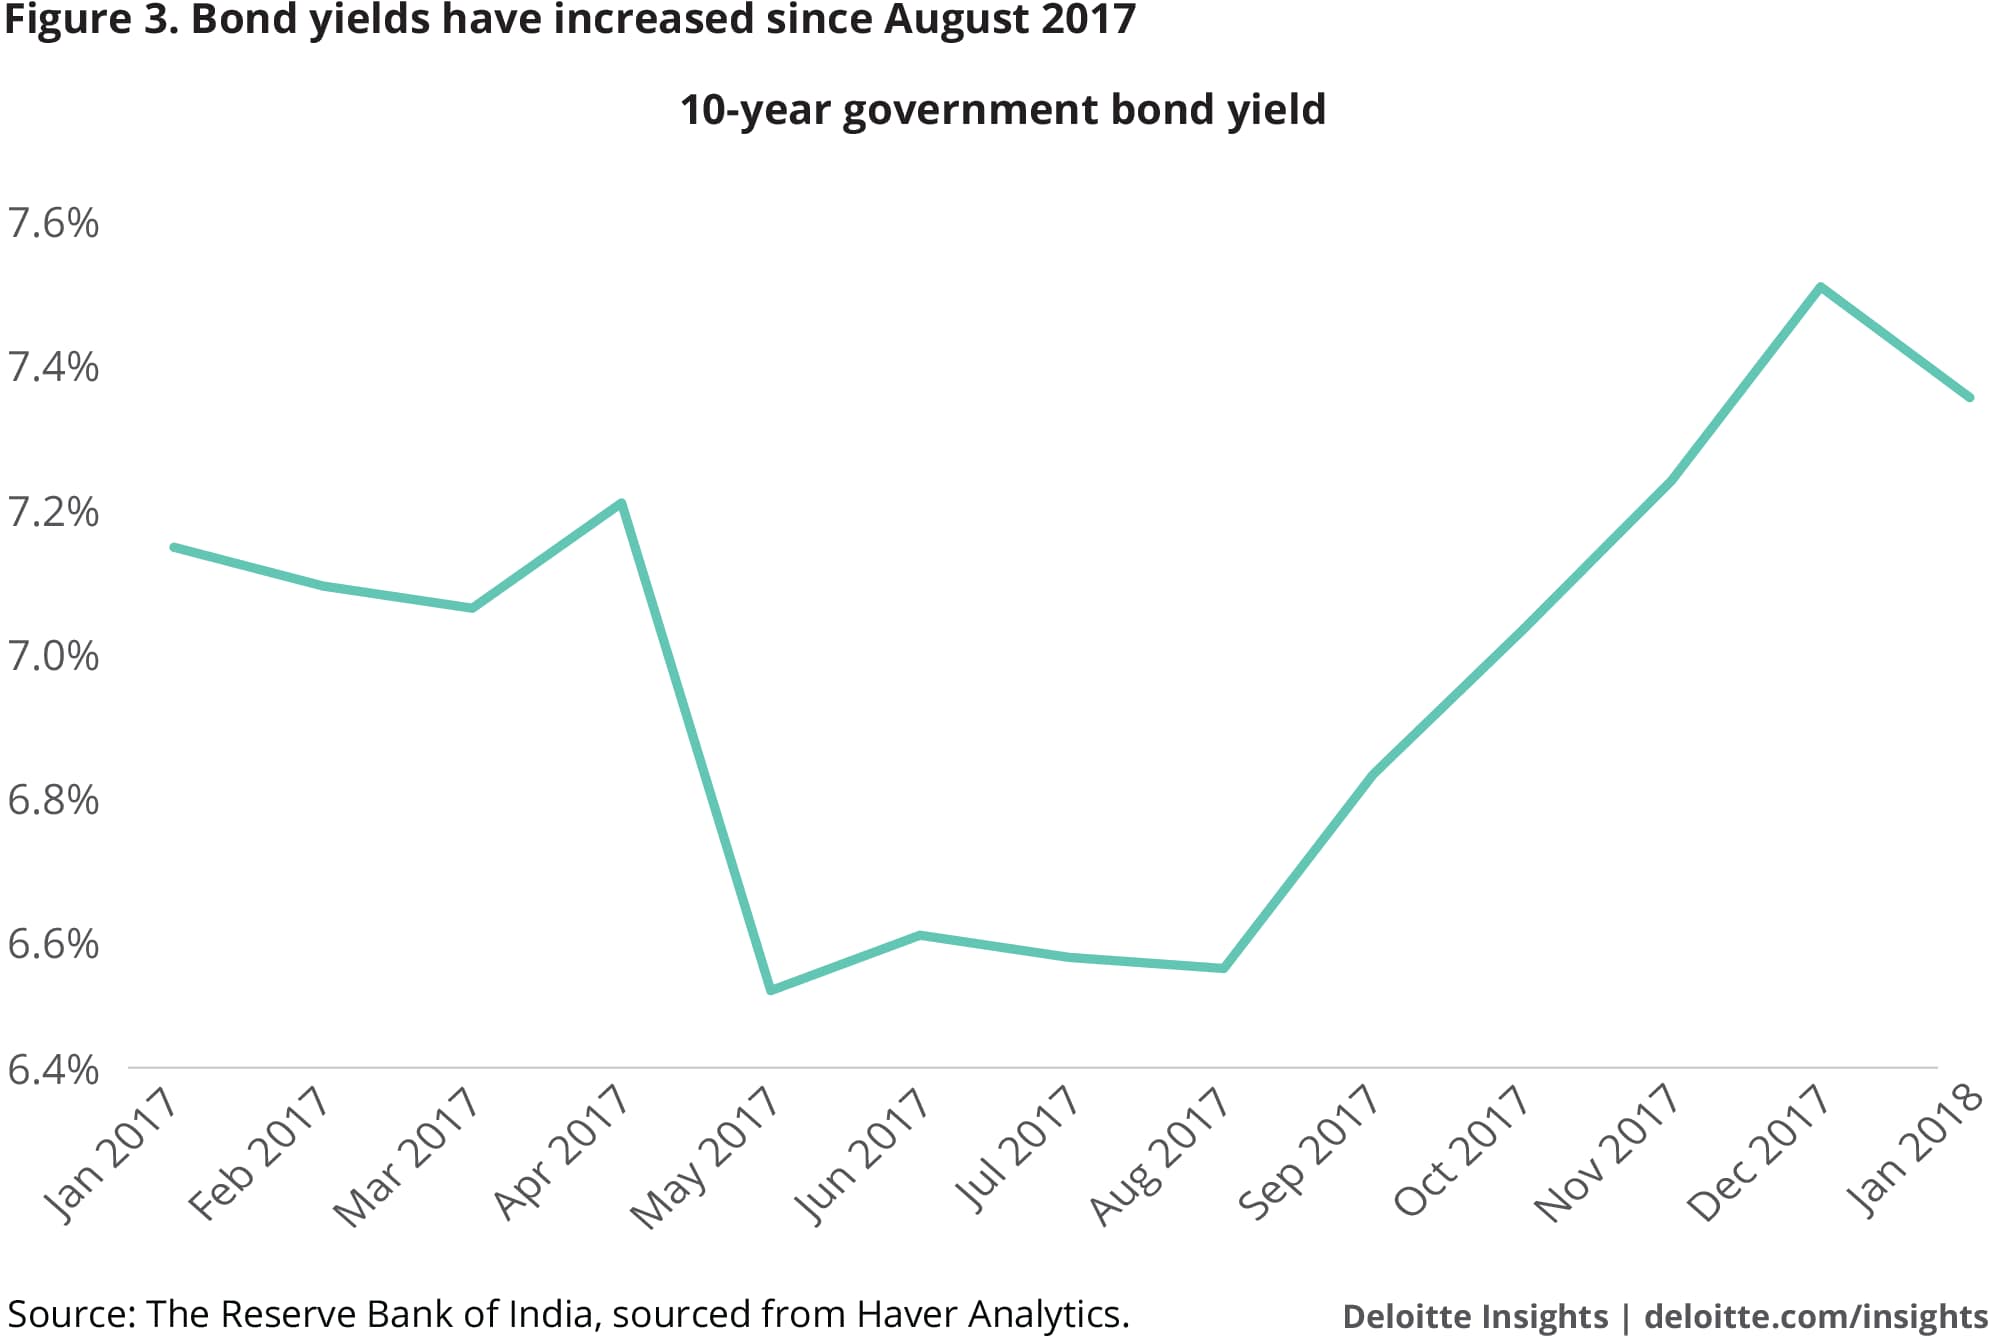 Bond yields have increased since August 2017